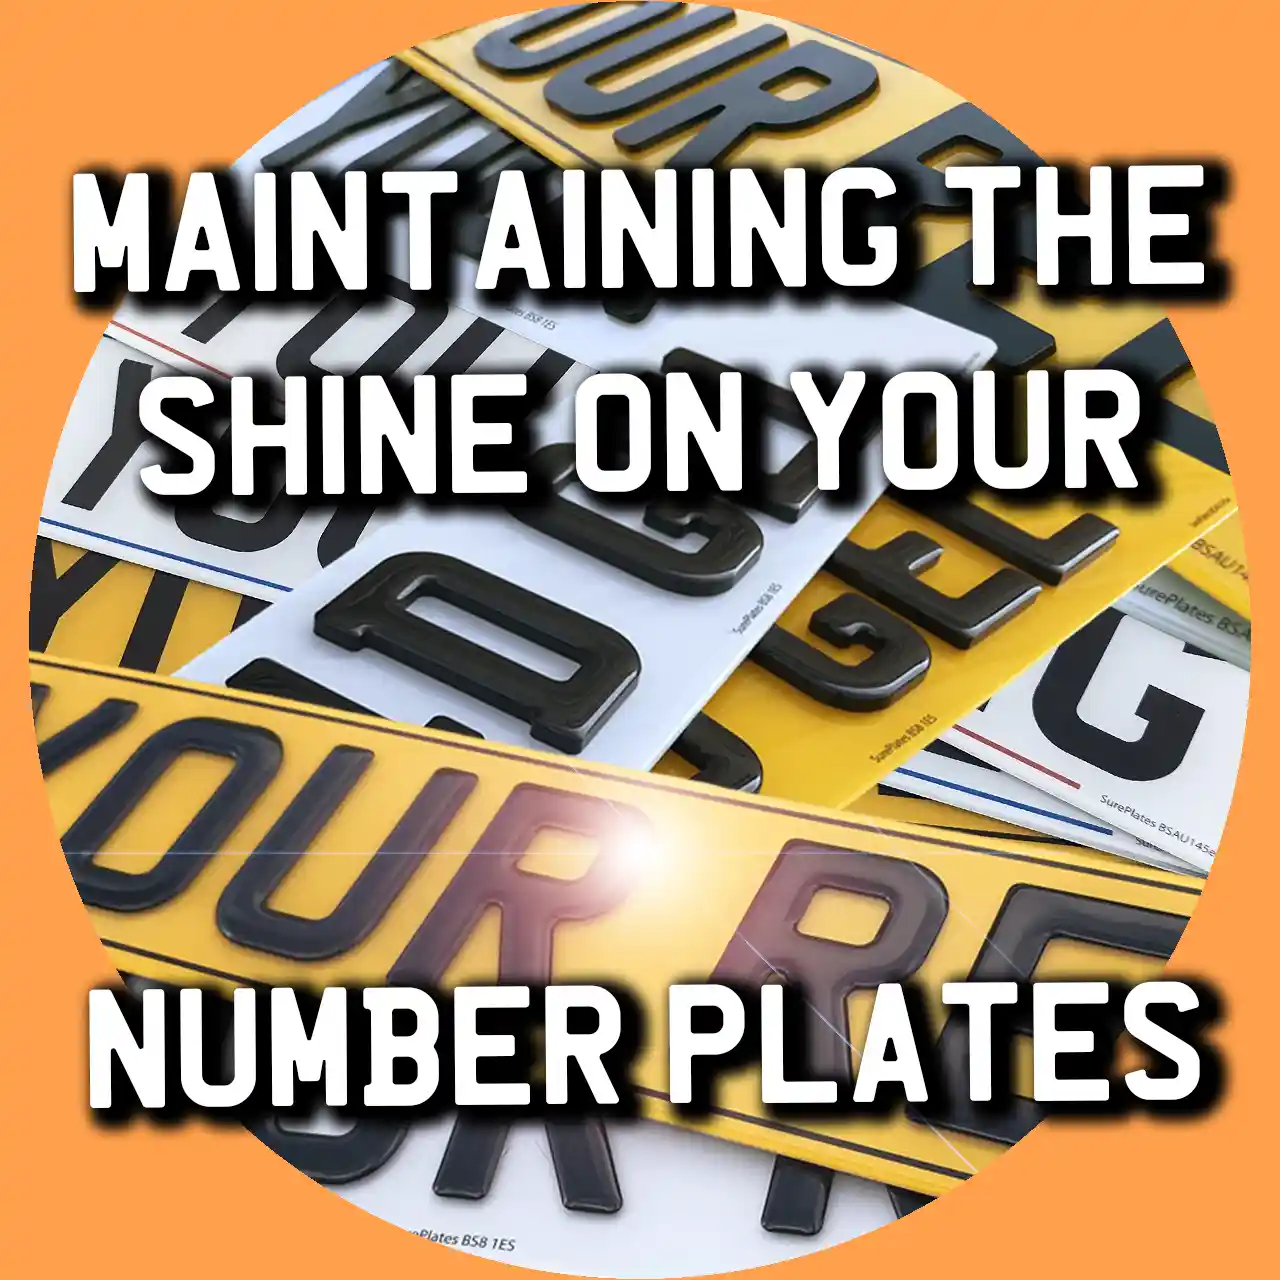 sureplates-plate-perfection-tips-for-maintaining-the-shine-on-your-number-plates